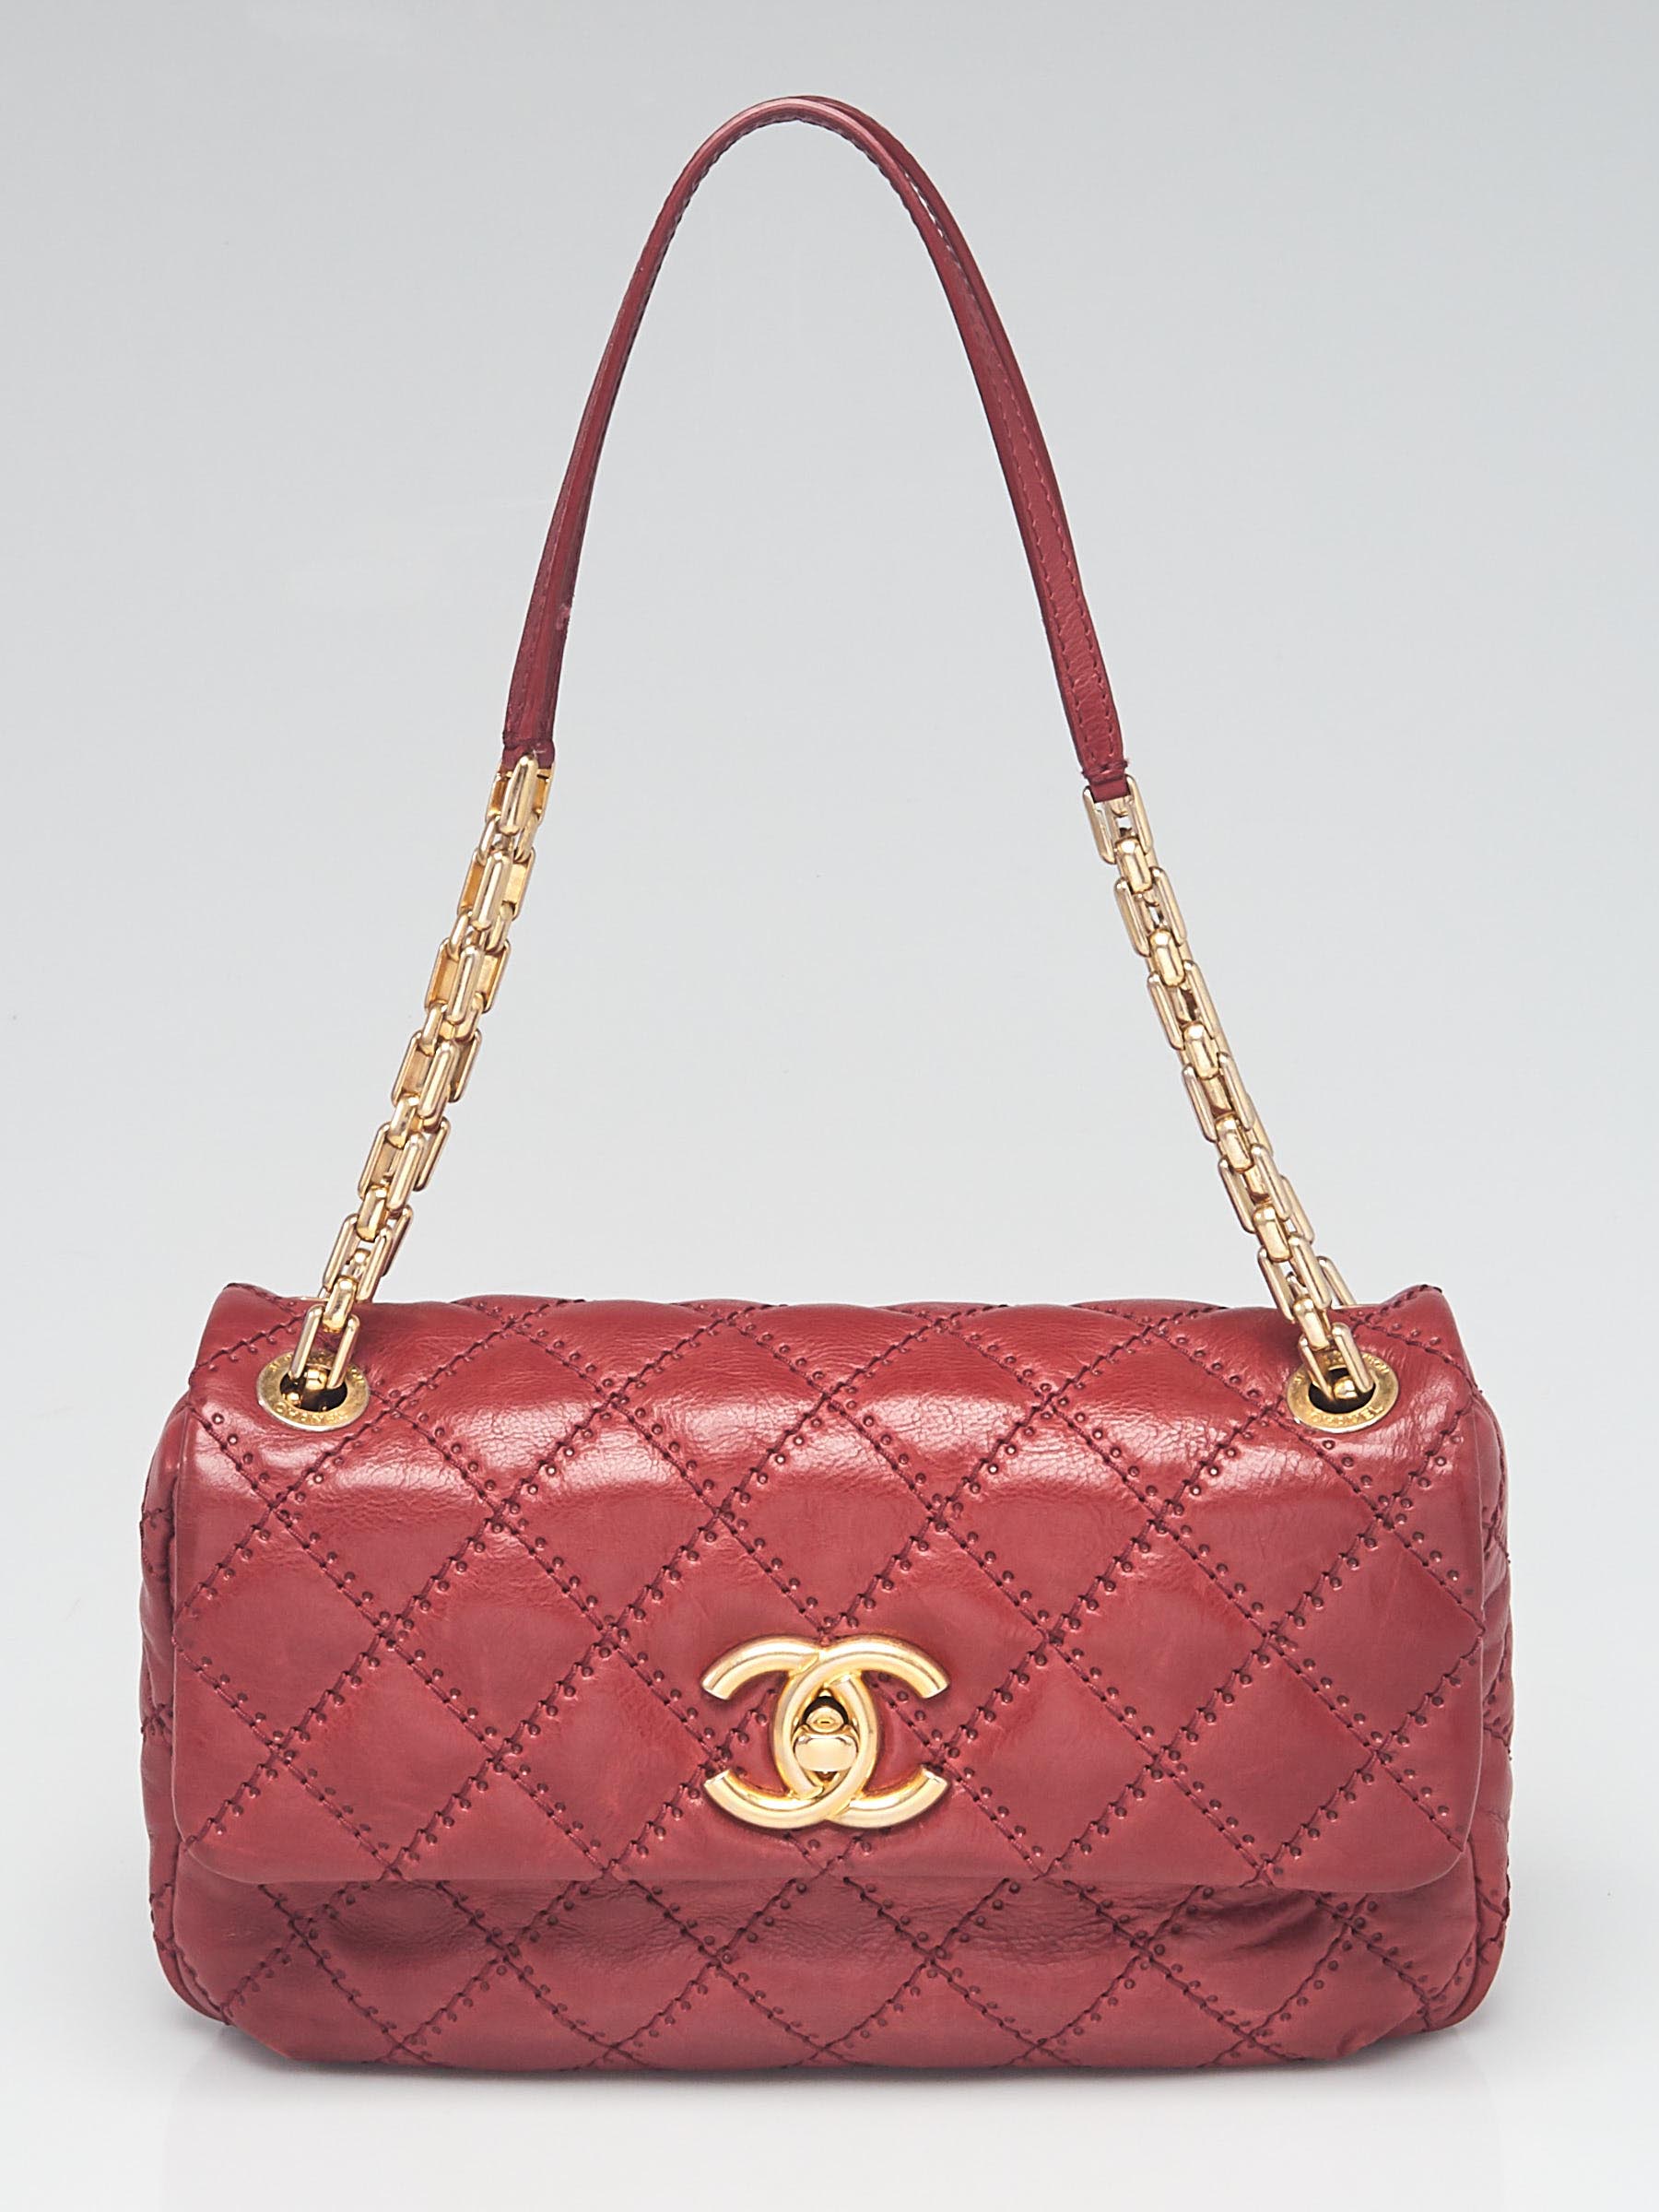 Chanel Red Quilted Leather Retro Chain Flap Bag - Yoogi's Closet